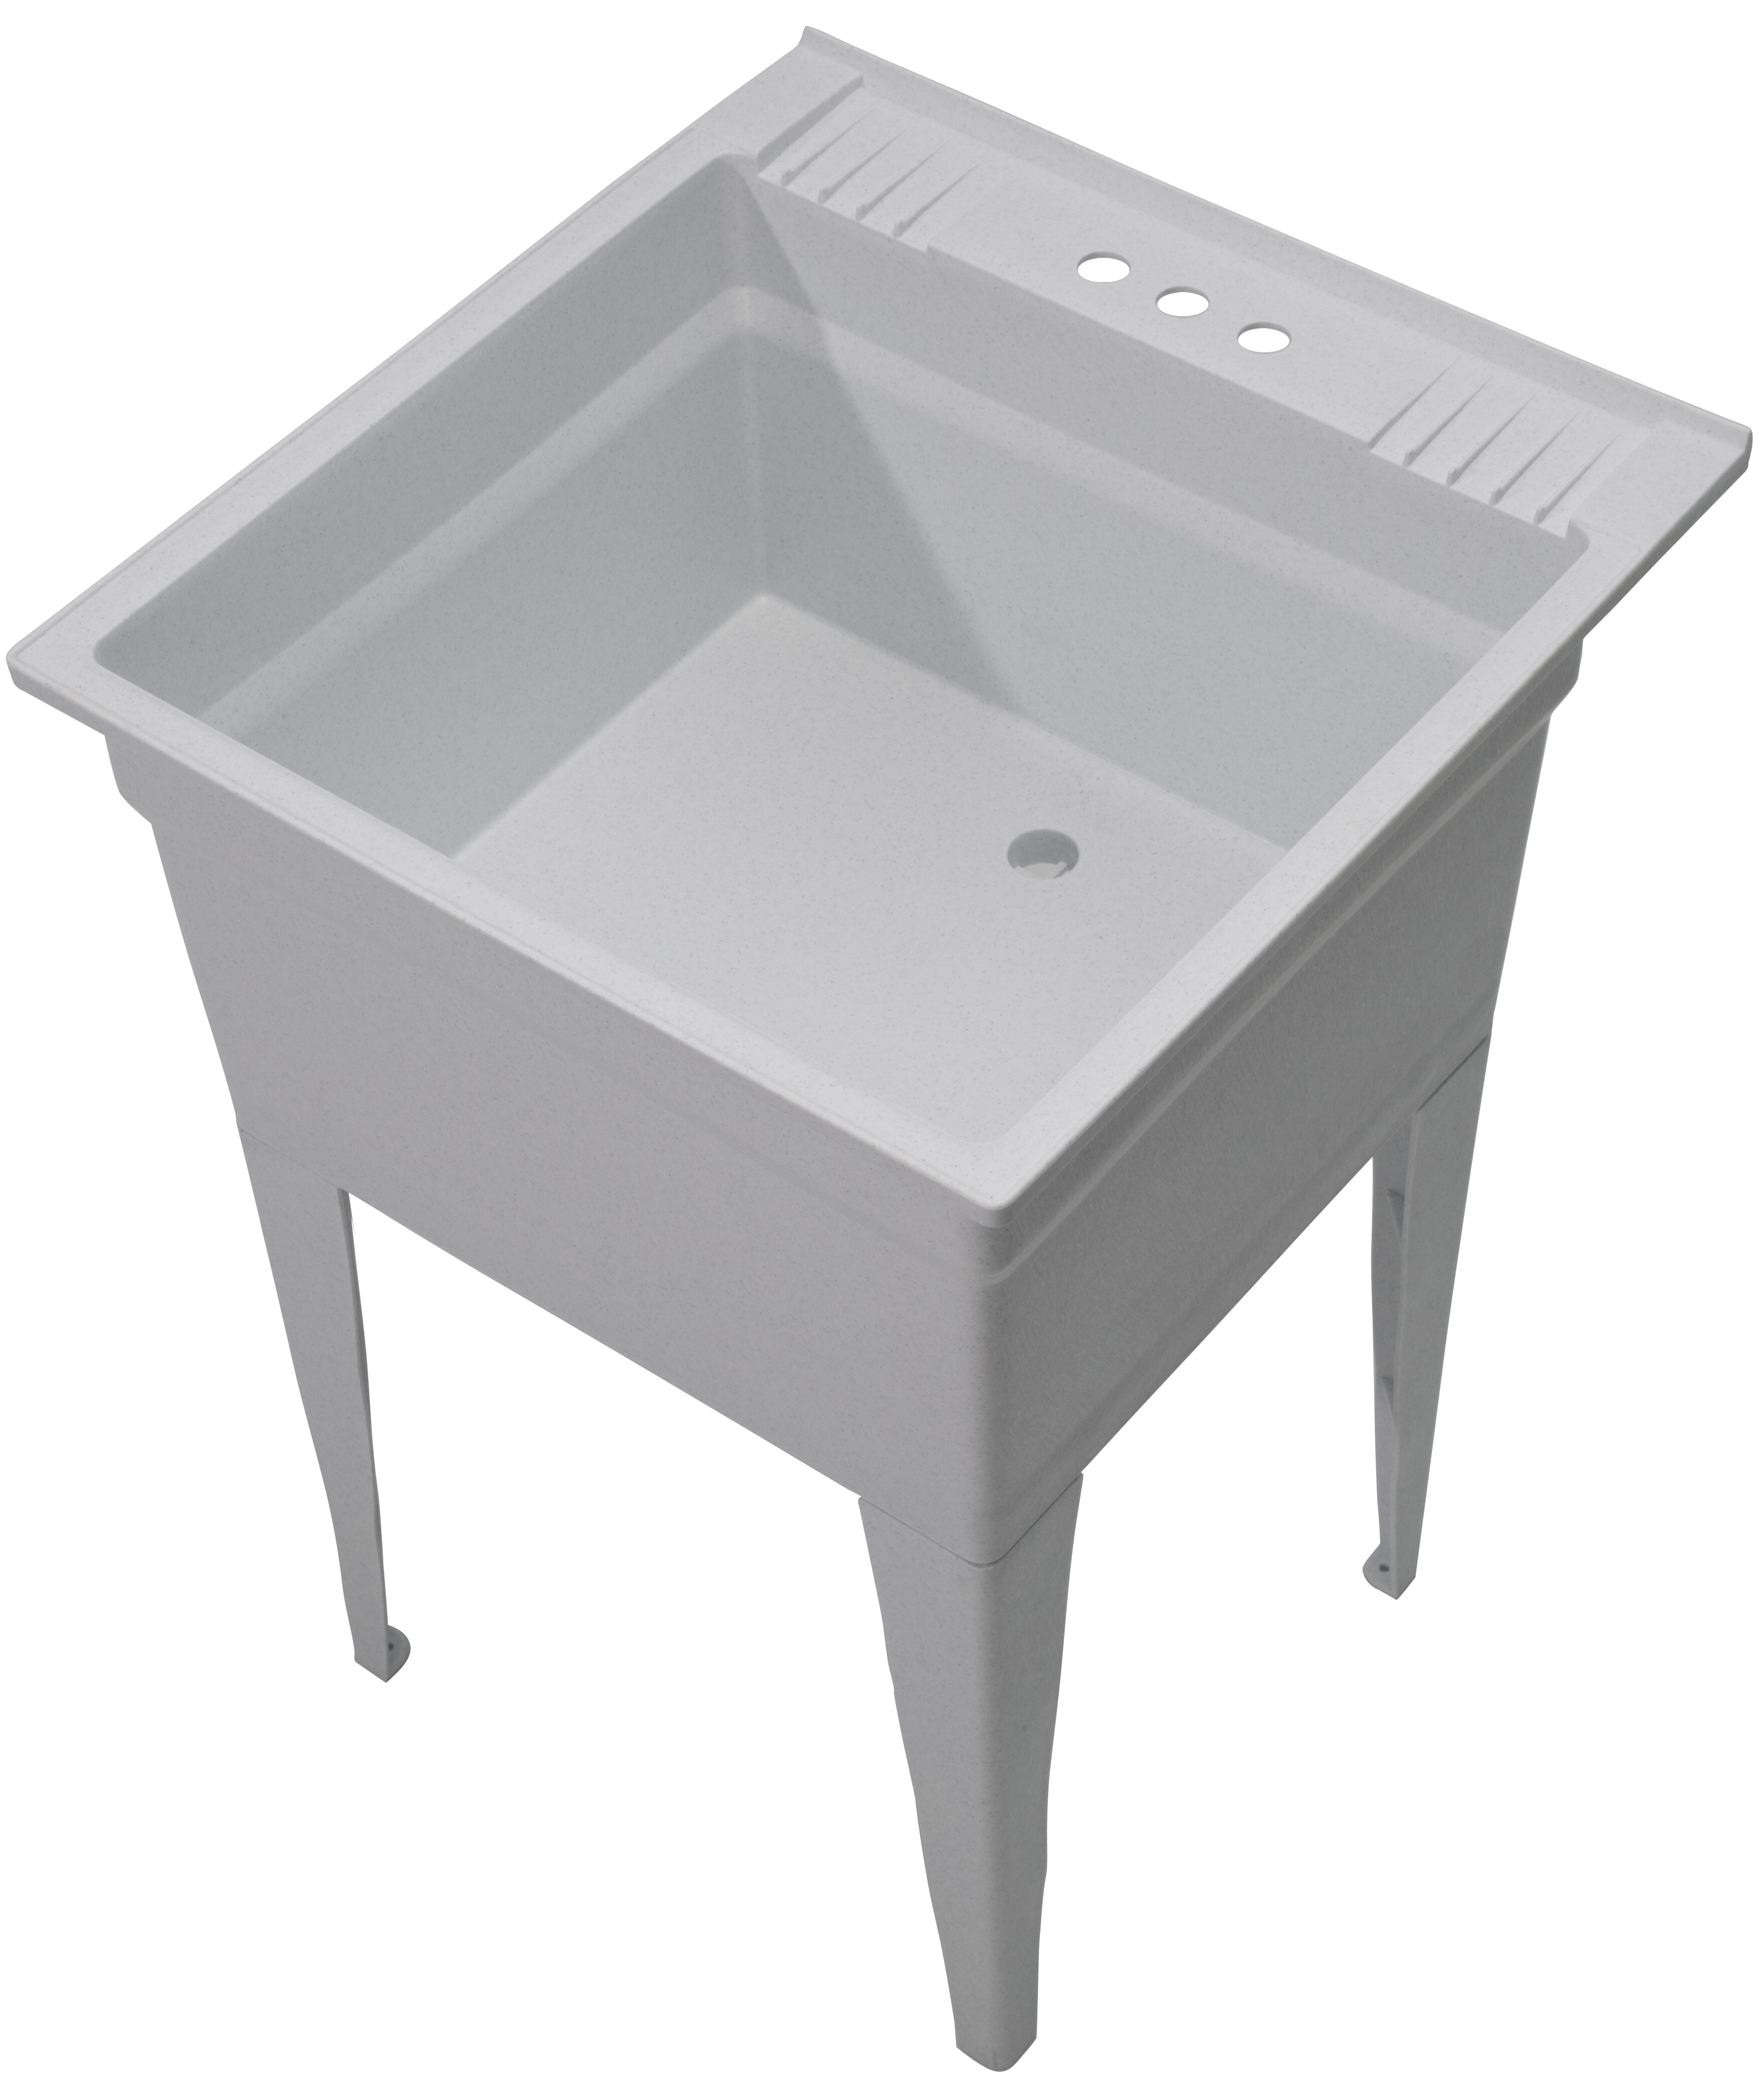 Essential 23 75 X 24 75 Free Standing Laundry Sink